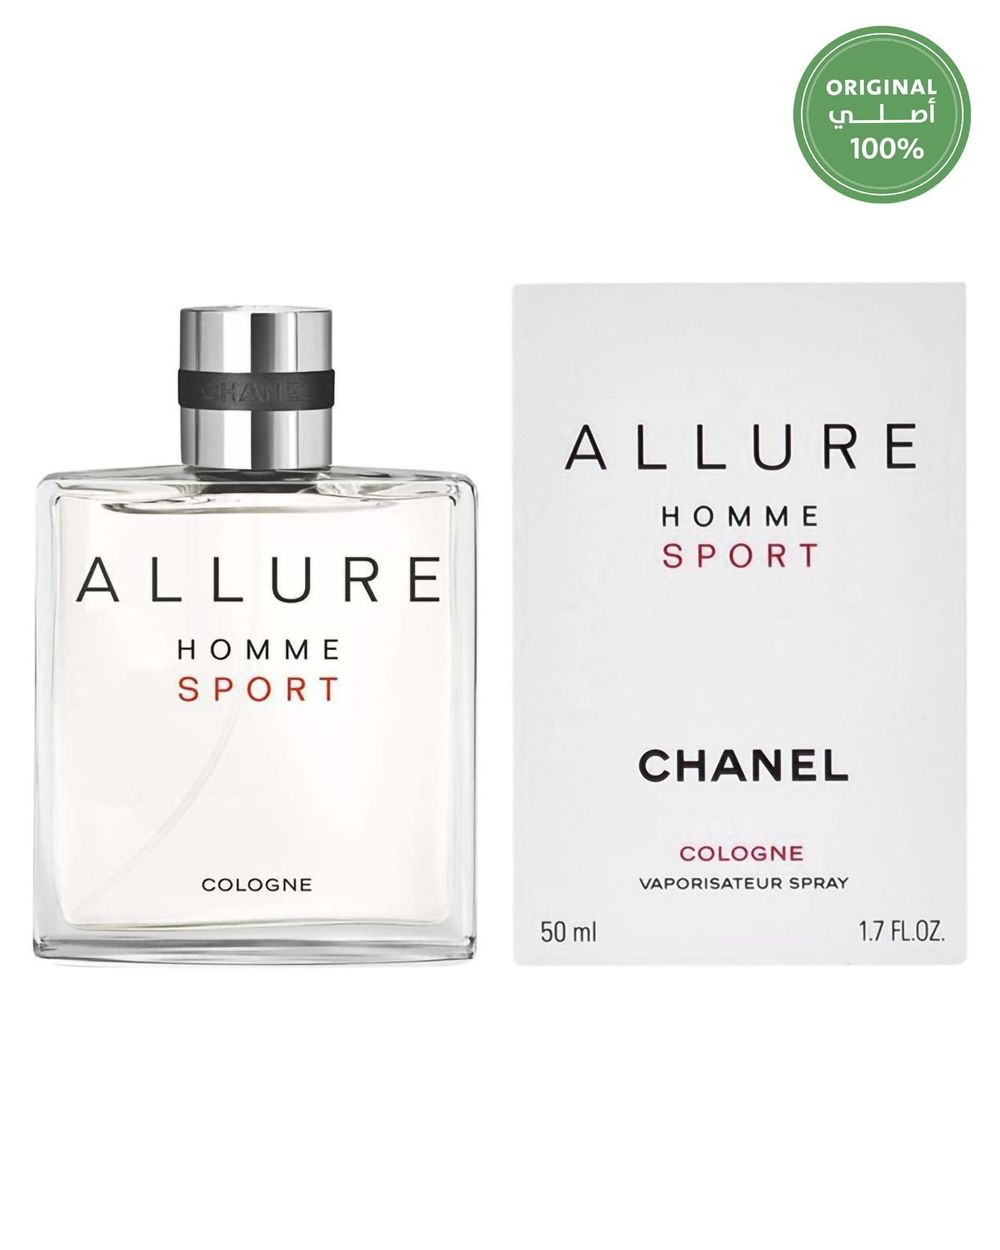 Allure homme cologne. Шанель Аллюр спорт 50 мл. Chanel Allure homme Sport 50ml. Chanel Allure Sport men 50ml Cologne. Chanel Allure homme 50 мл.